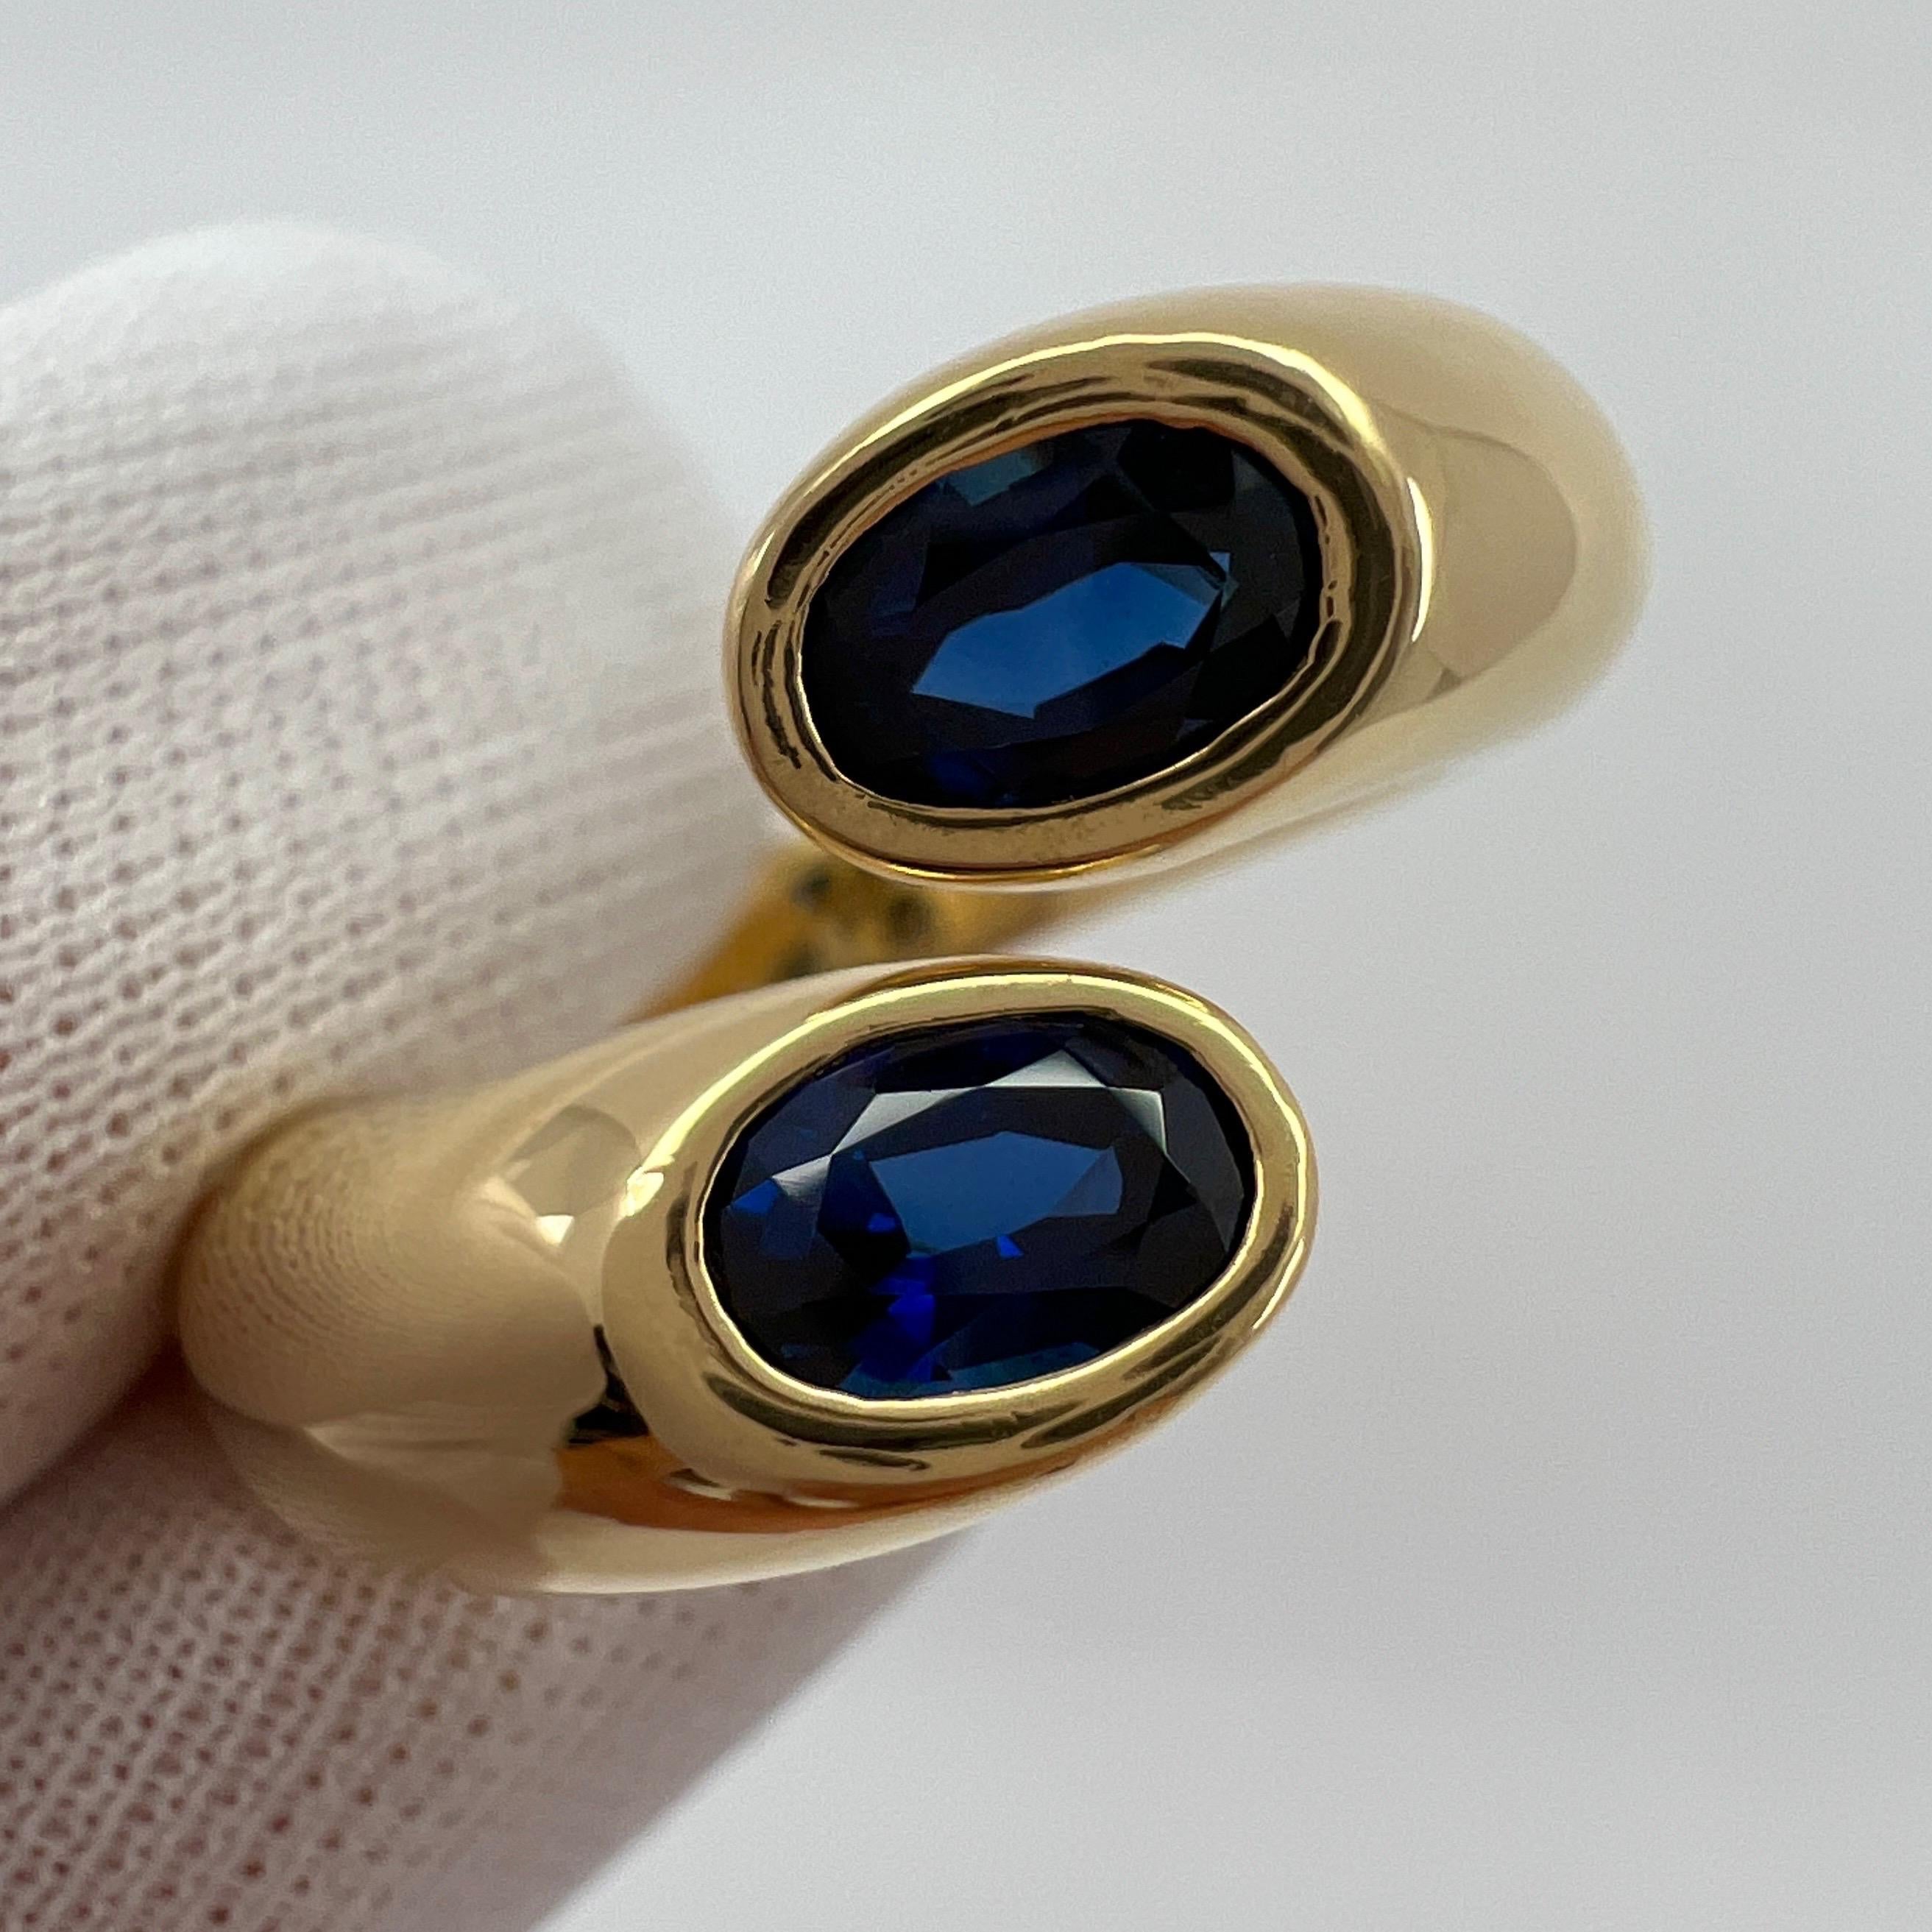 Vintage Cartier Deep Blue Sapphire 18k Yellow Gold Bypass Ring.

Stunning yellow gold ring set with 2 fine deep blue oval cut sapphires. Fine jewellery houses like Cartier only use the finest of gemstones and these sapphires are no exception. 2